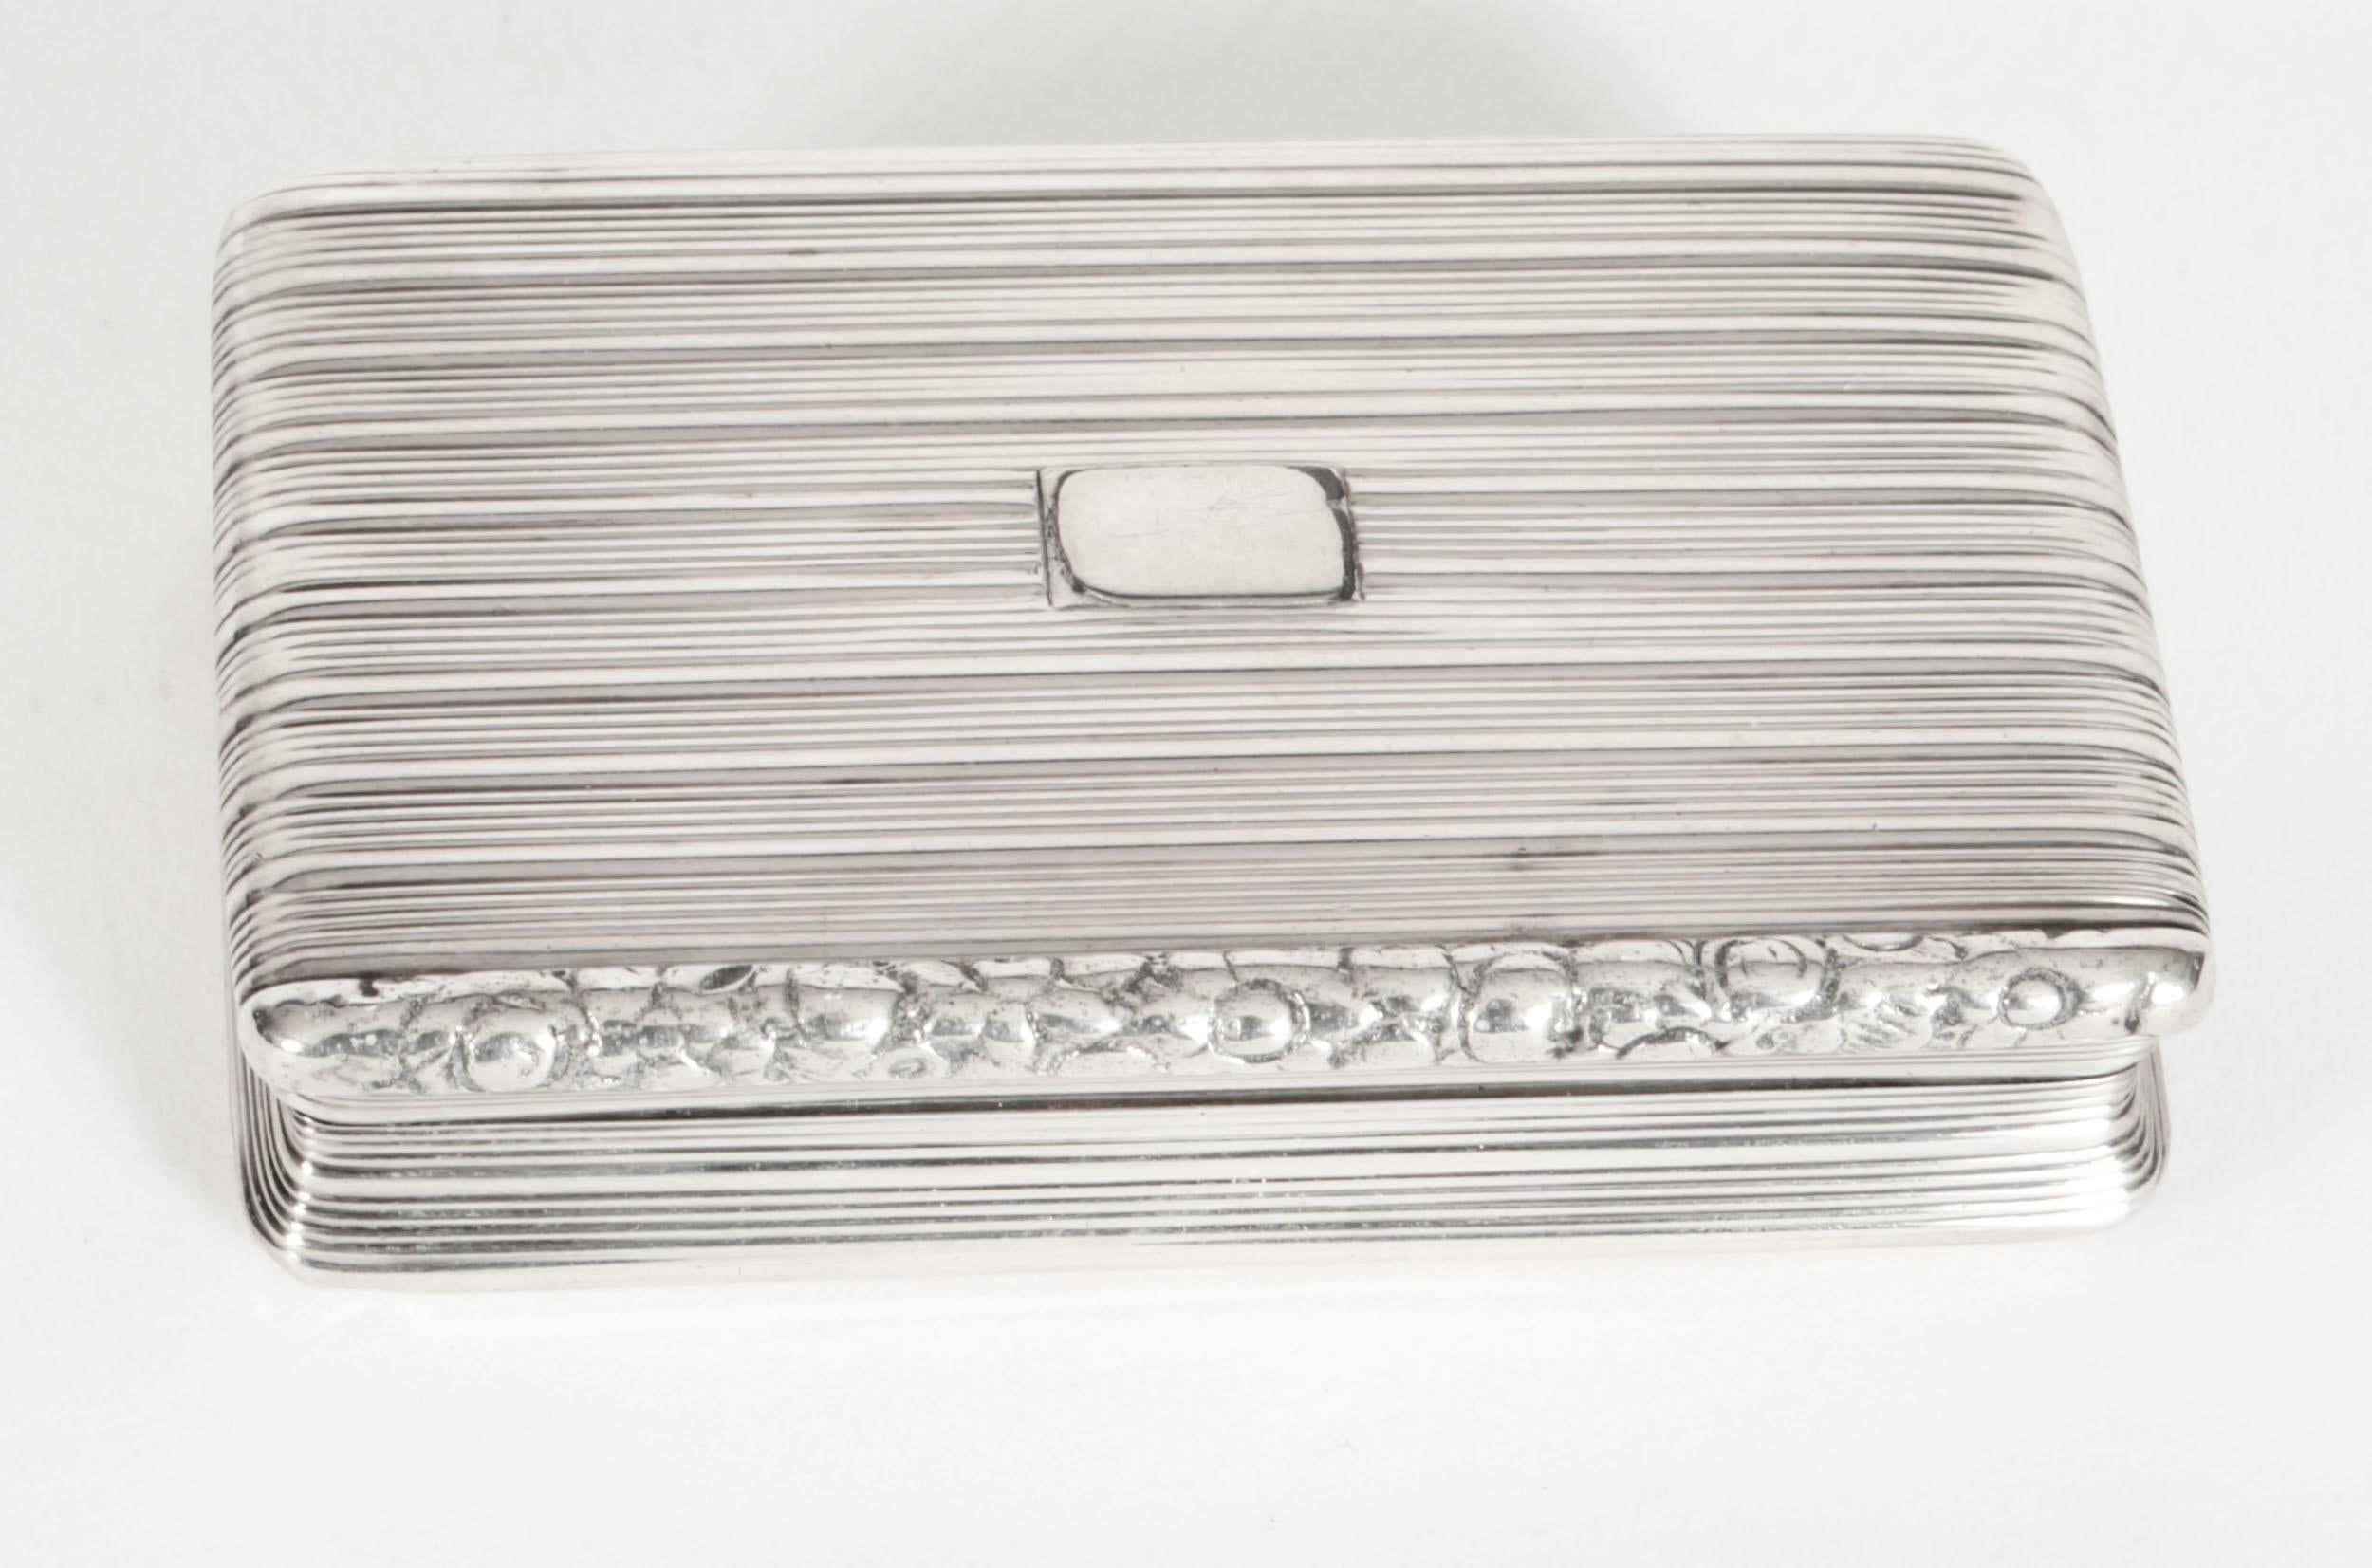 This is an exquisite antique George III sterling silver snuff box, with hallmarks for Birmingham 1817, of rectangular form with reeded decoration, vacant cartouche, moulded front rim, opening to reveal a gilt interior
 
There is no mistaking its